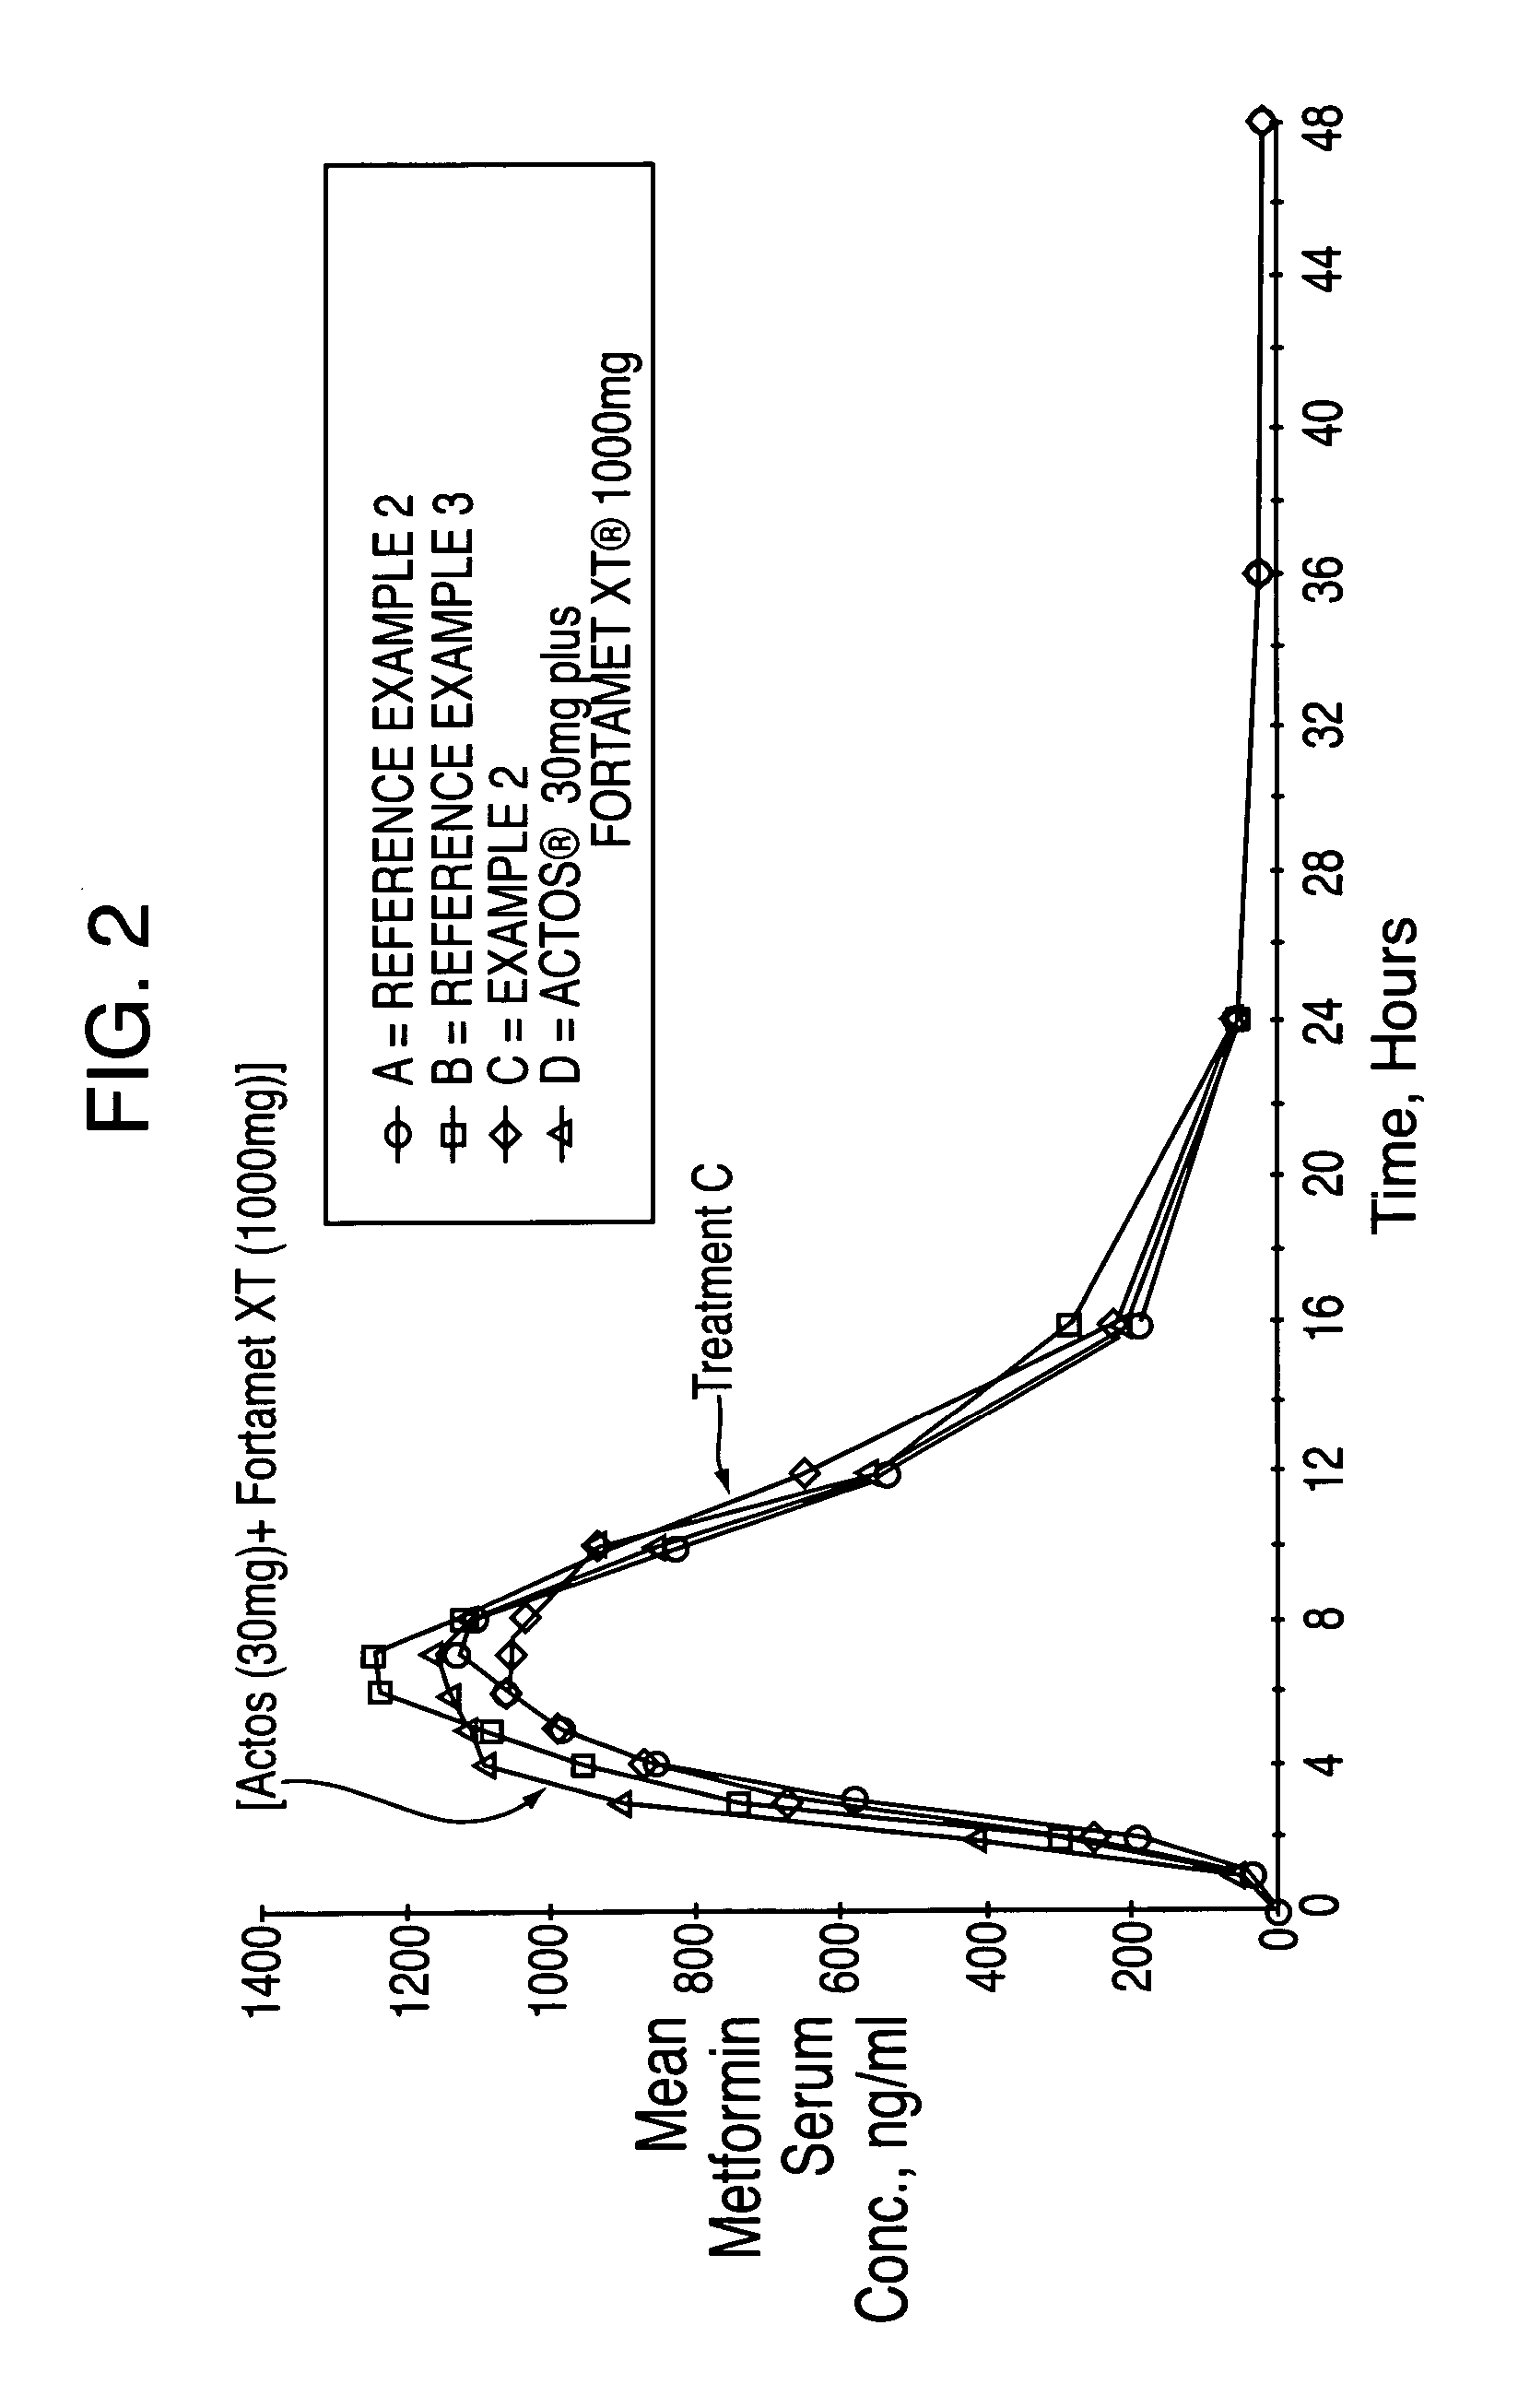 Pharmaceutical formulation containing a biguanide and a thiazolidinedione derivative